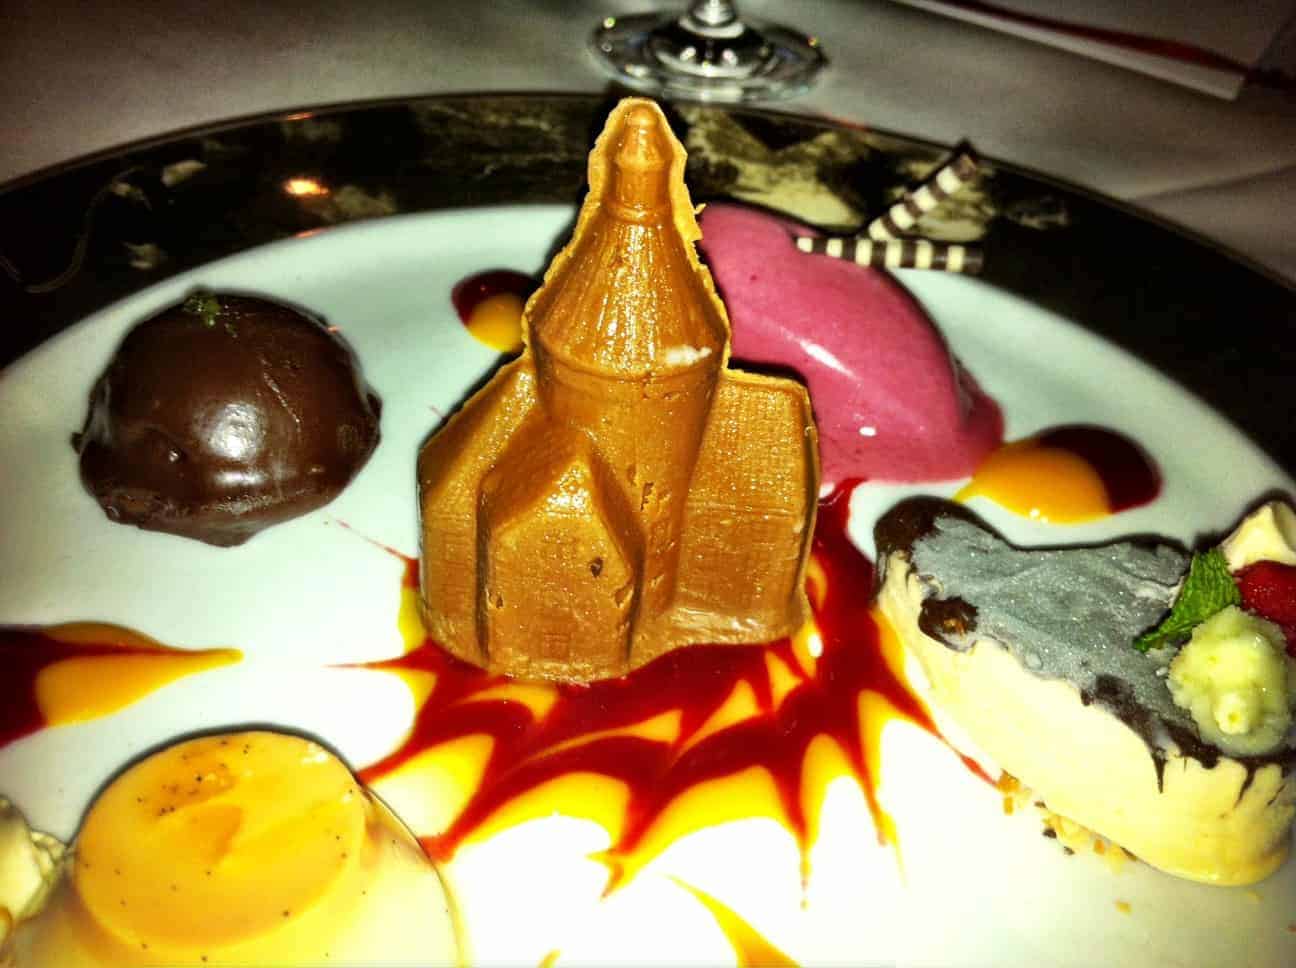 castle dessert served at my Castle Hotel in Germany